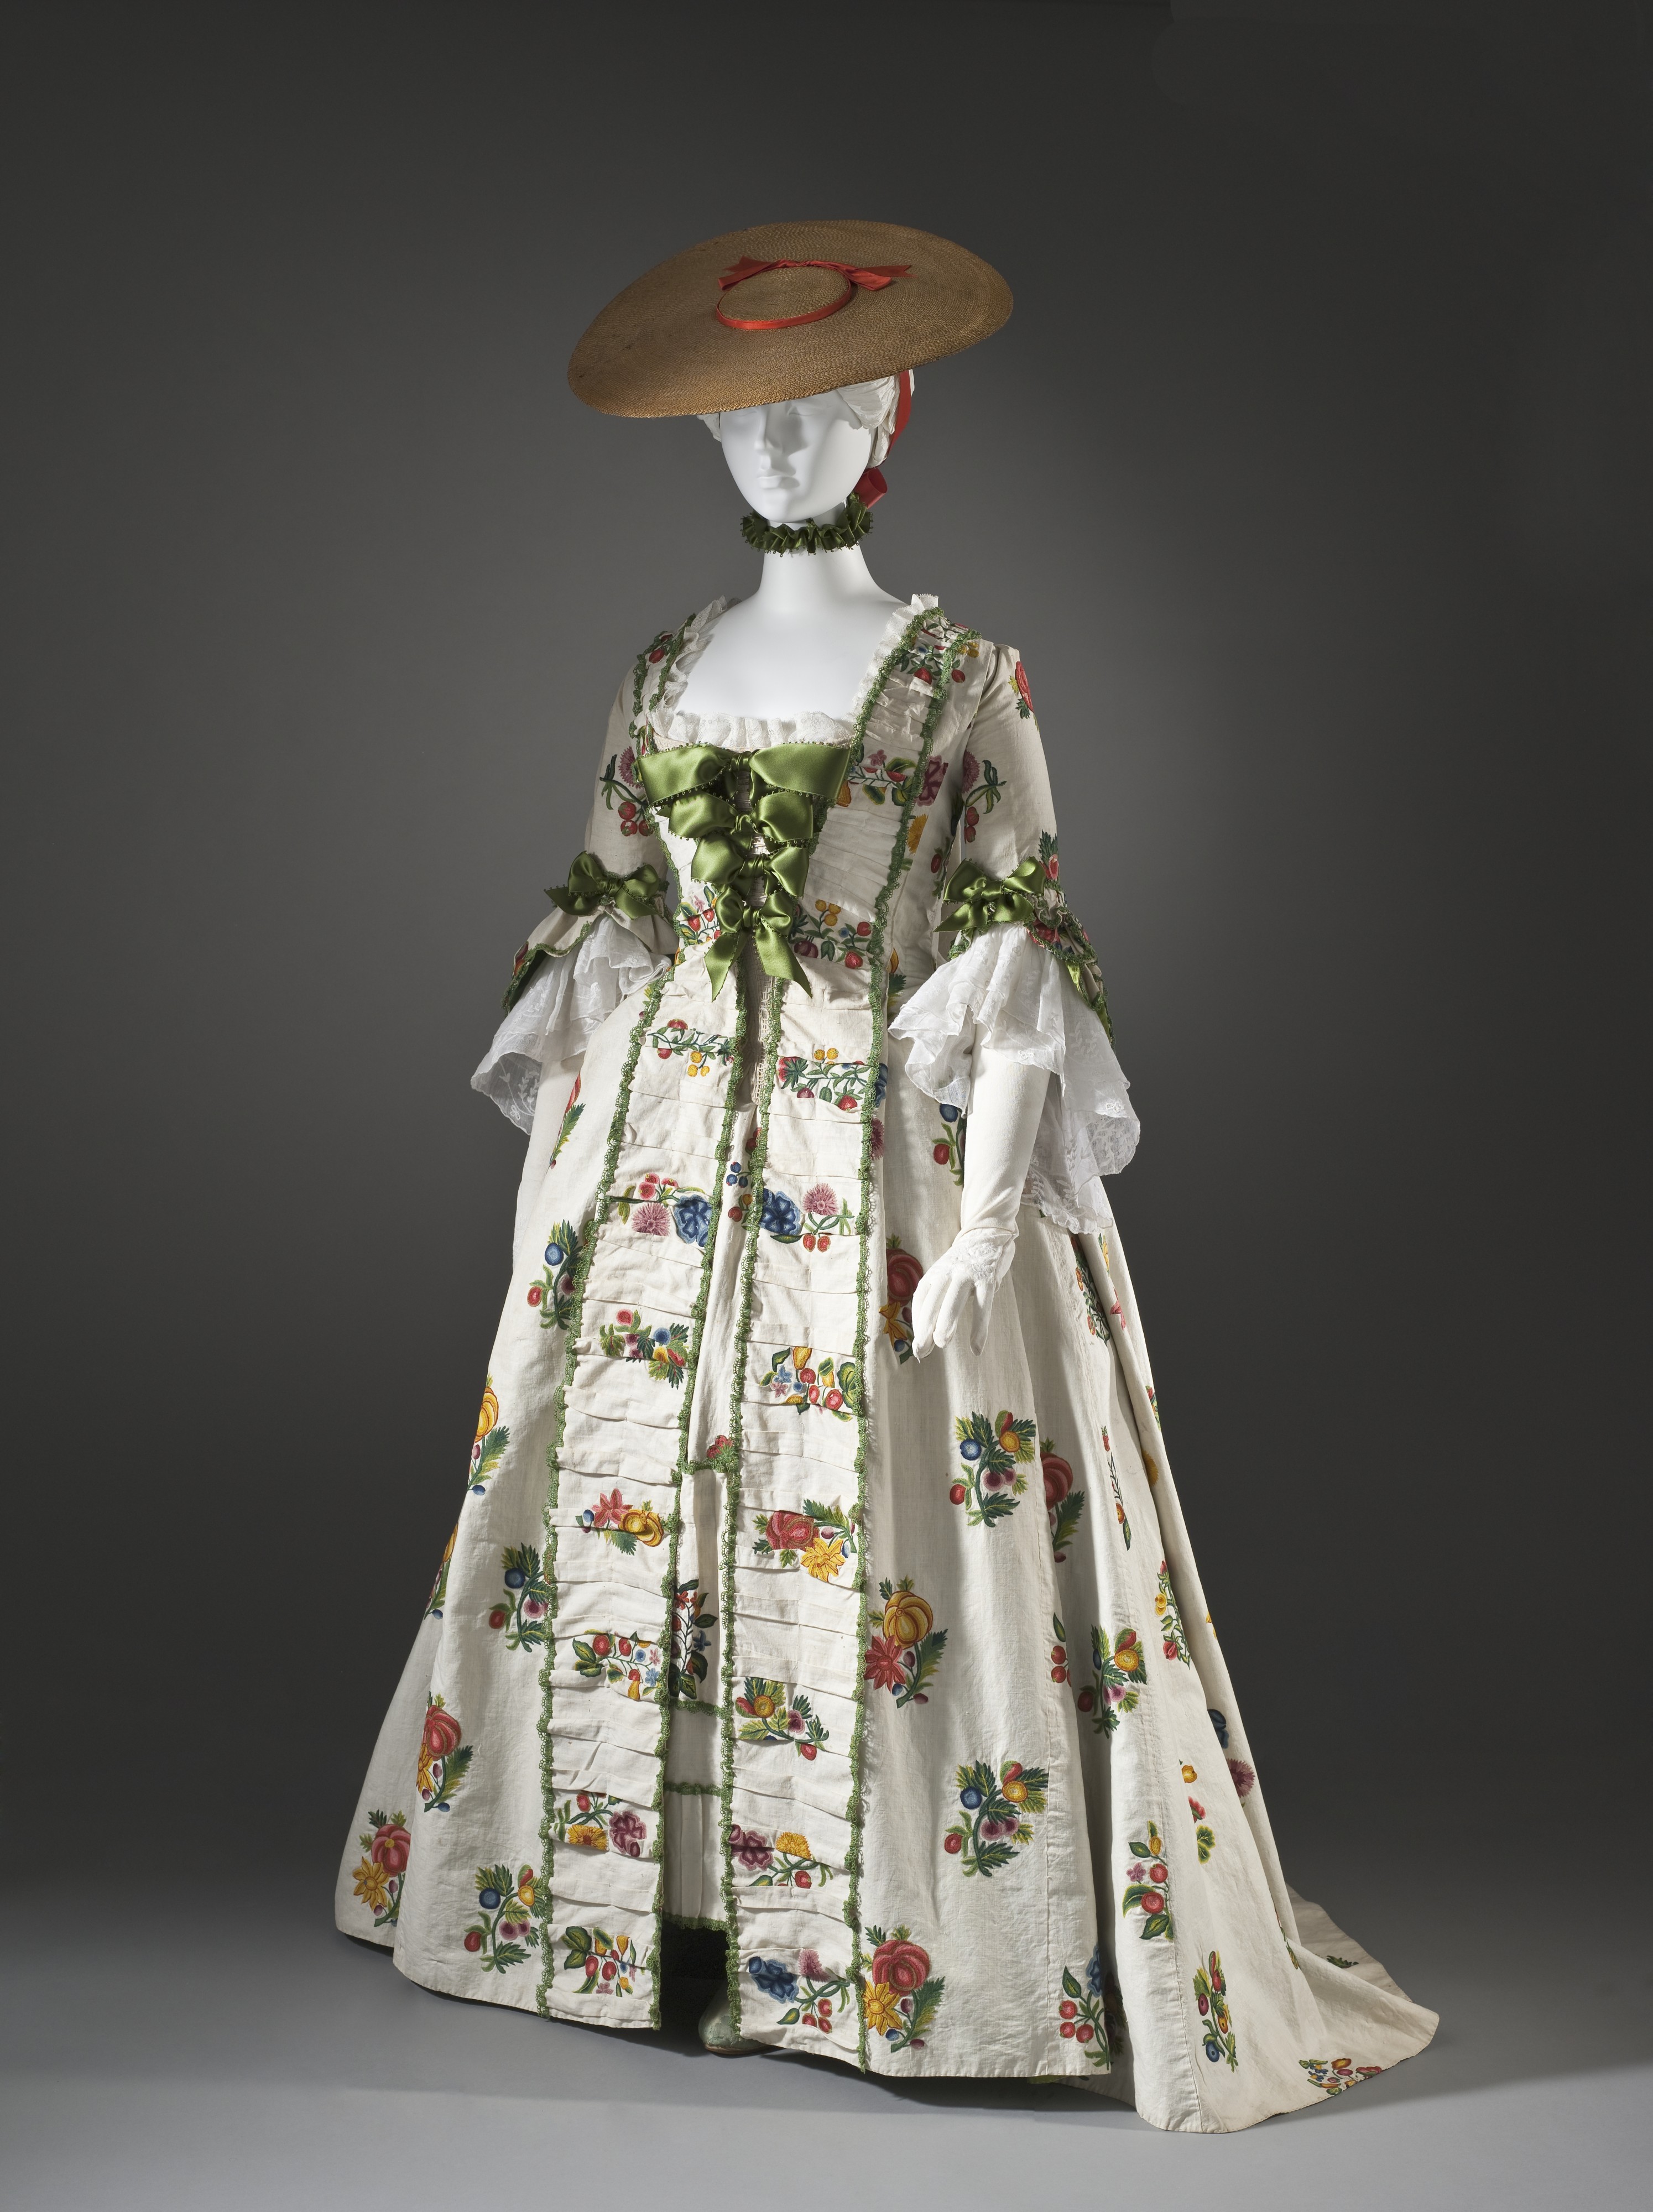 Robe a la Française with wool embroidery LACMA M.90.83a-b